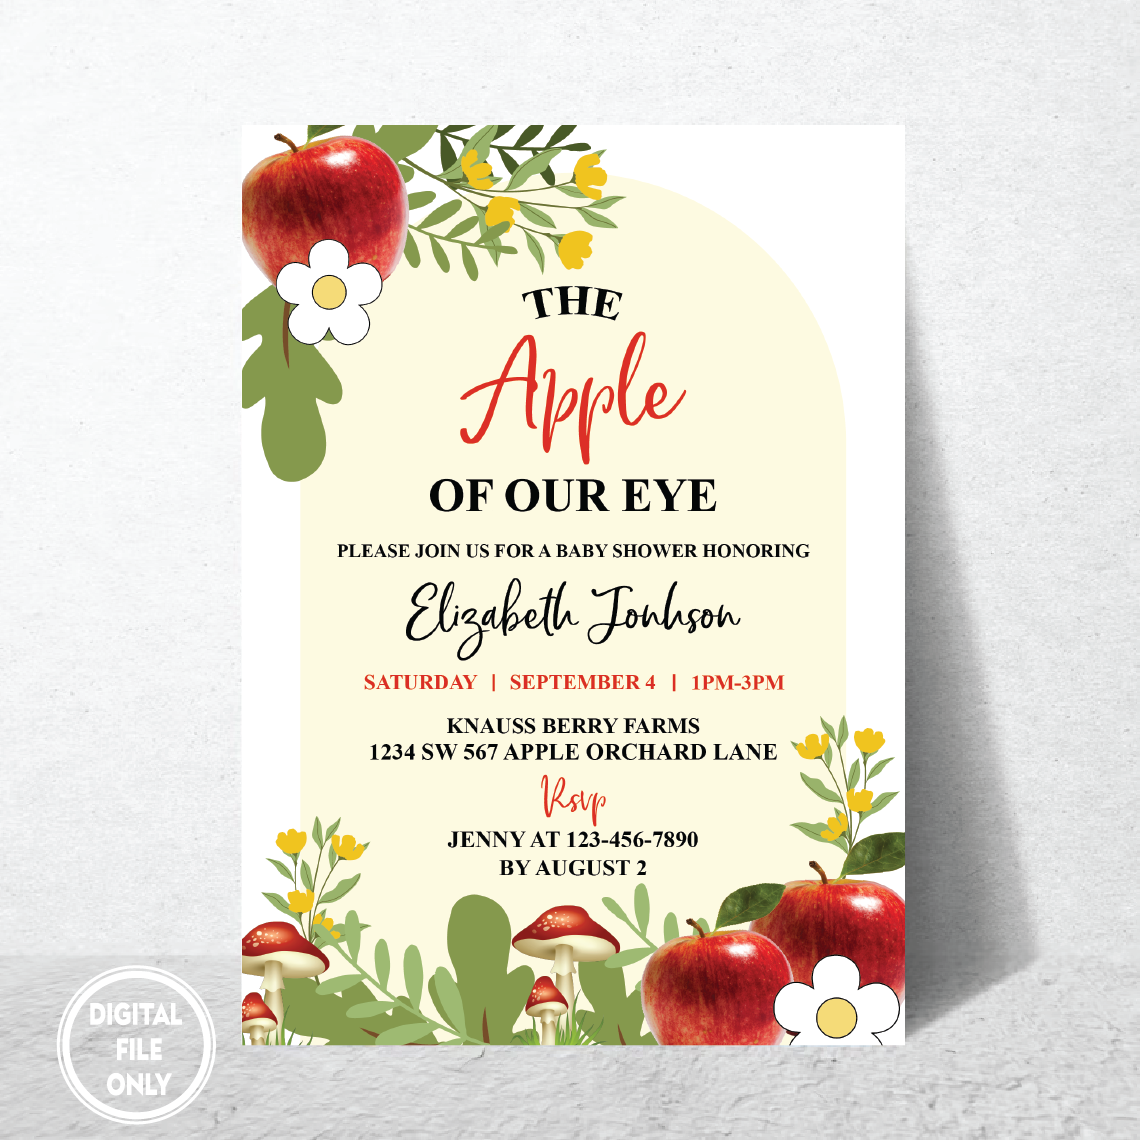 Personalized File Apple Of My Eye Baby Shower Invitation, Apple Baby Shower Invitation Fall Baby Shower Invitation Party Invitation PNG File Only